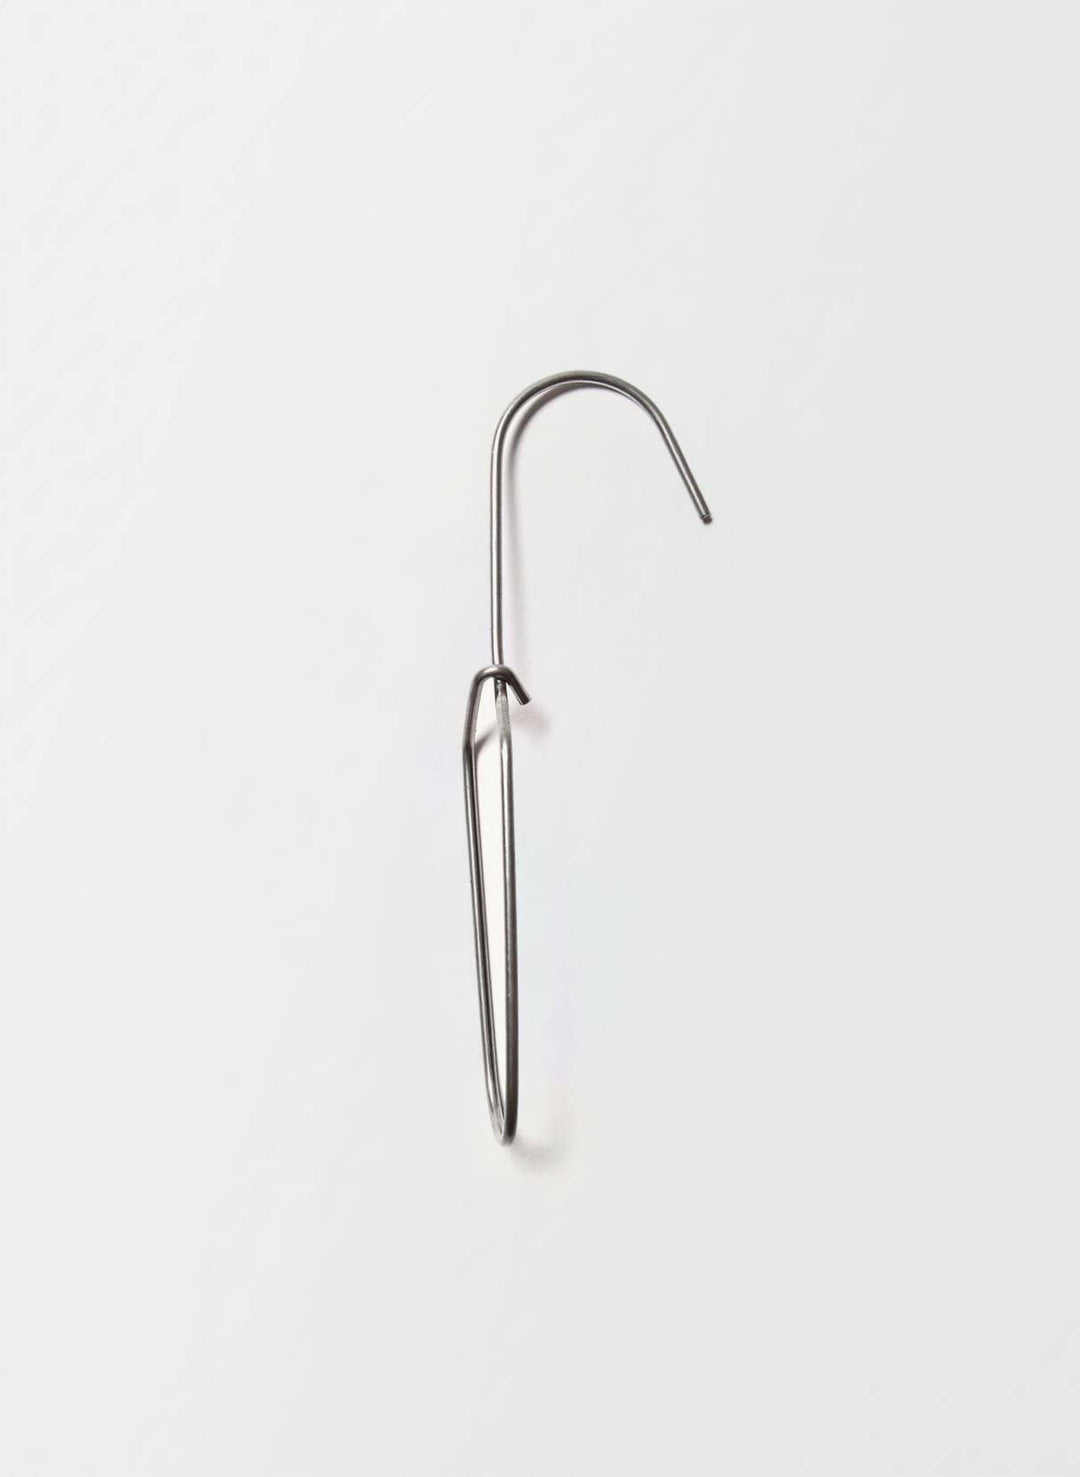 a metal hook with a white background